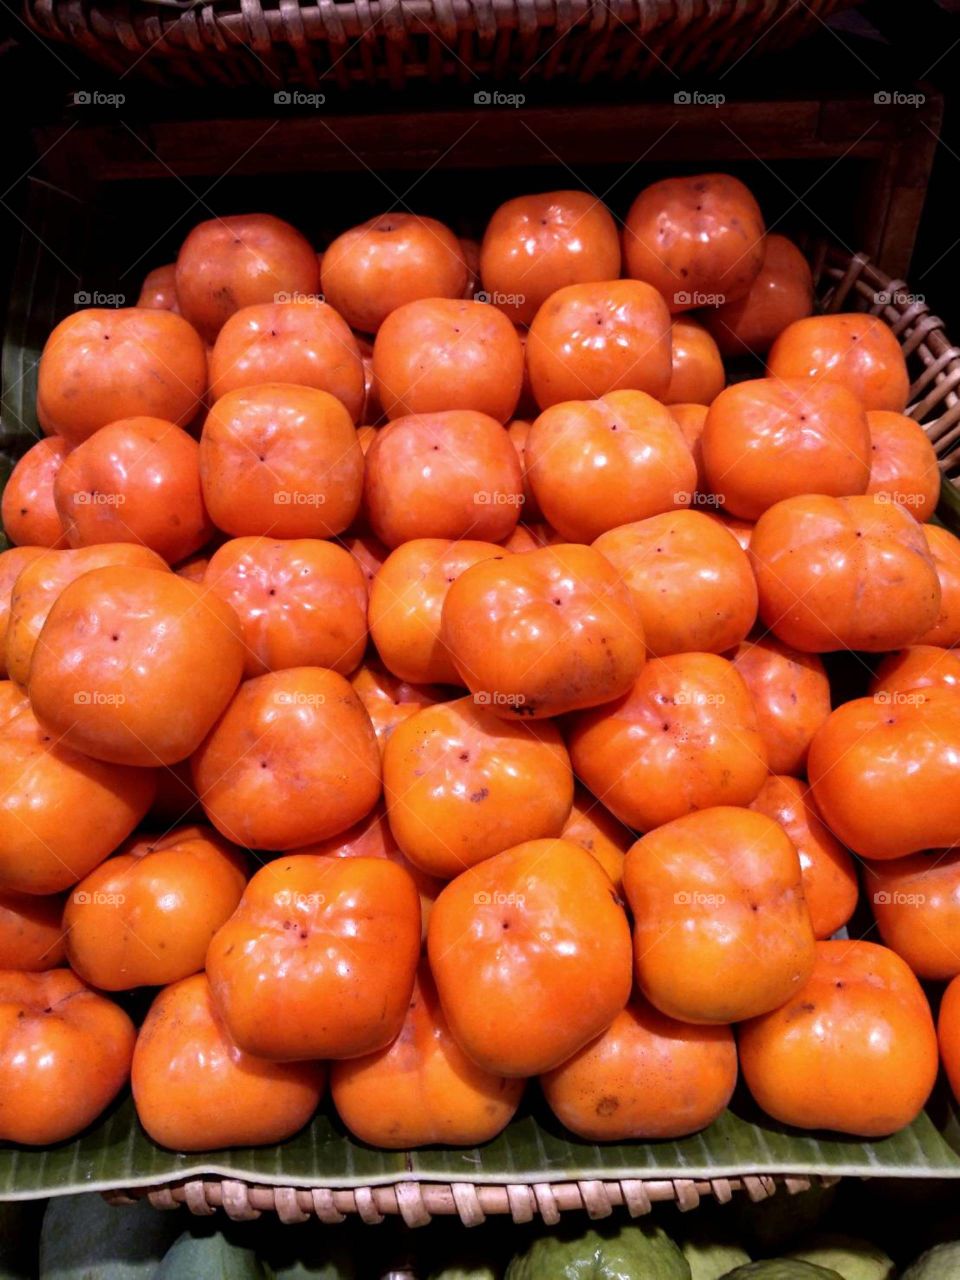 Persimmons for sale in supermarket.